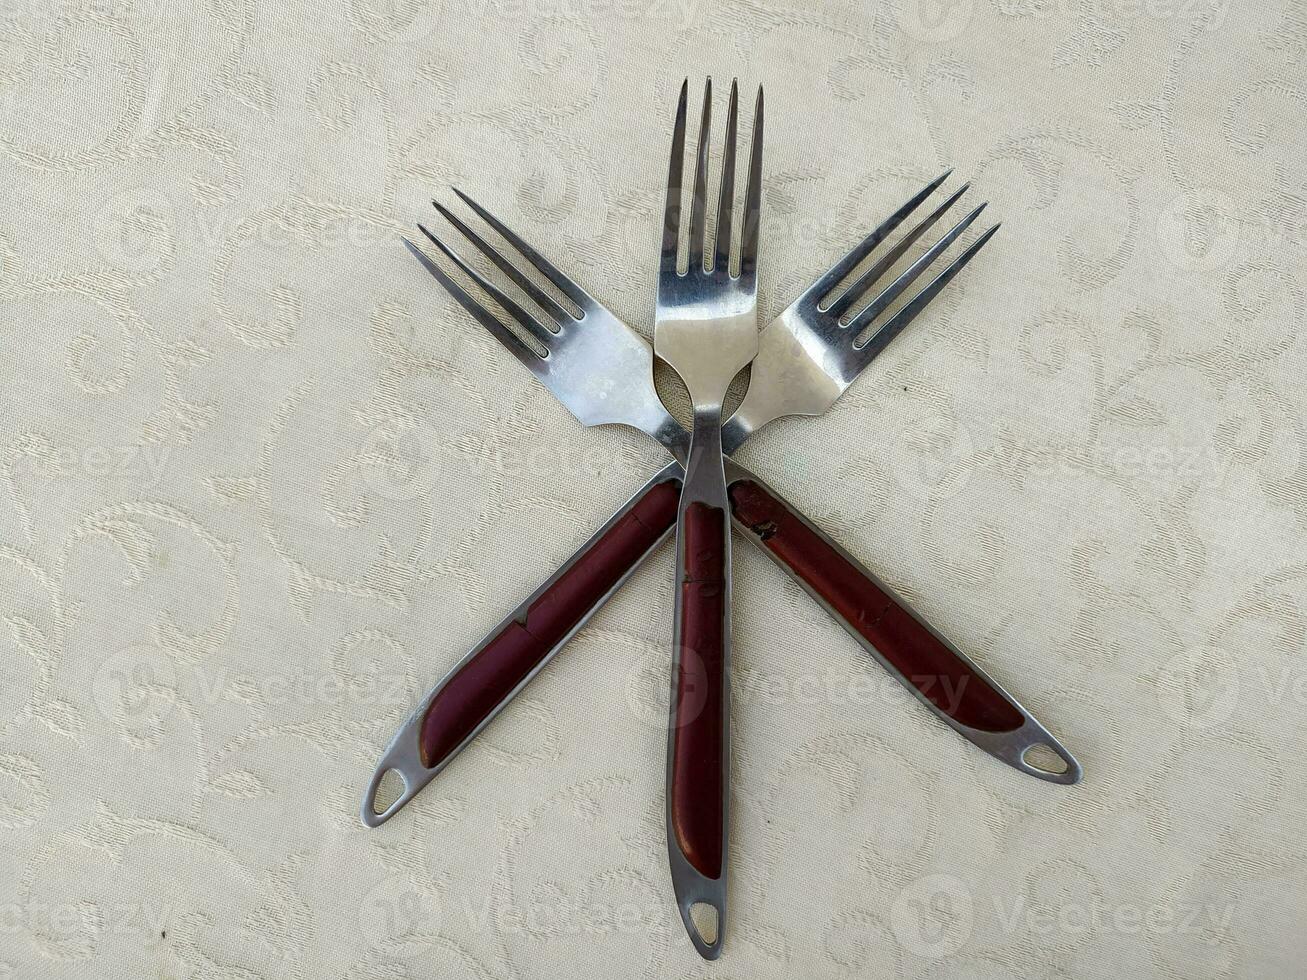 Several vintage forks arranged uniquely on the table photo